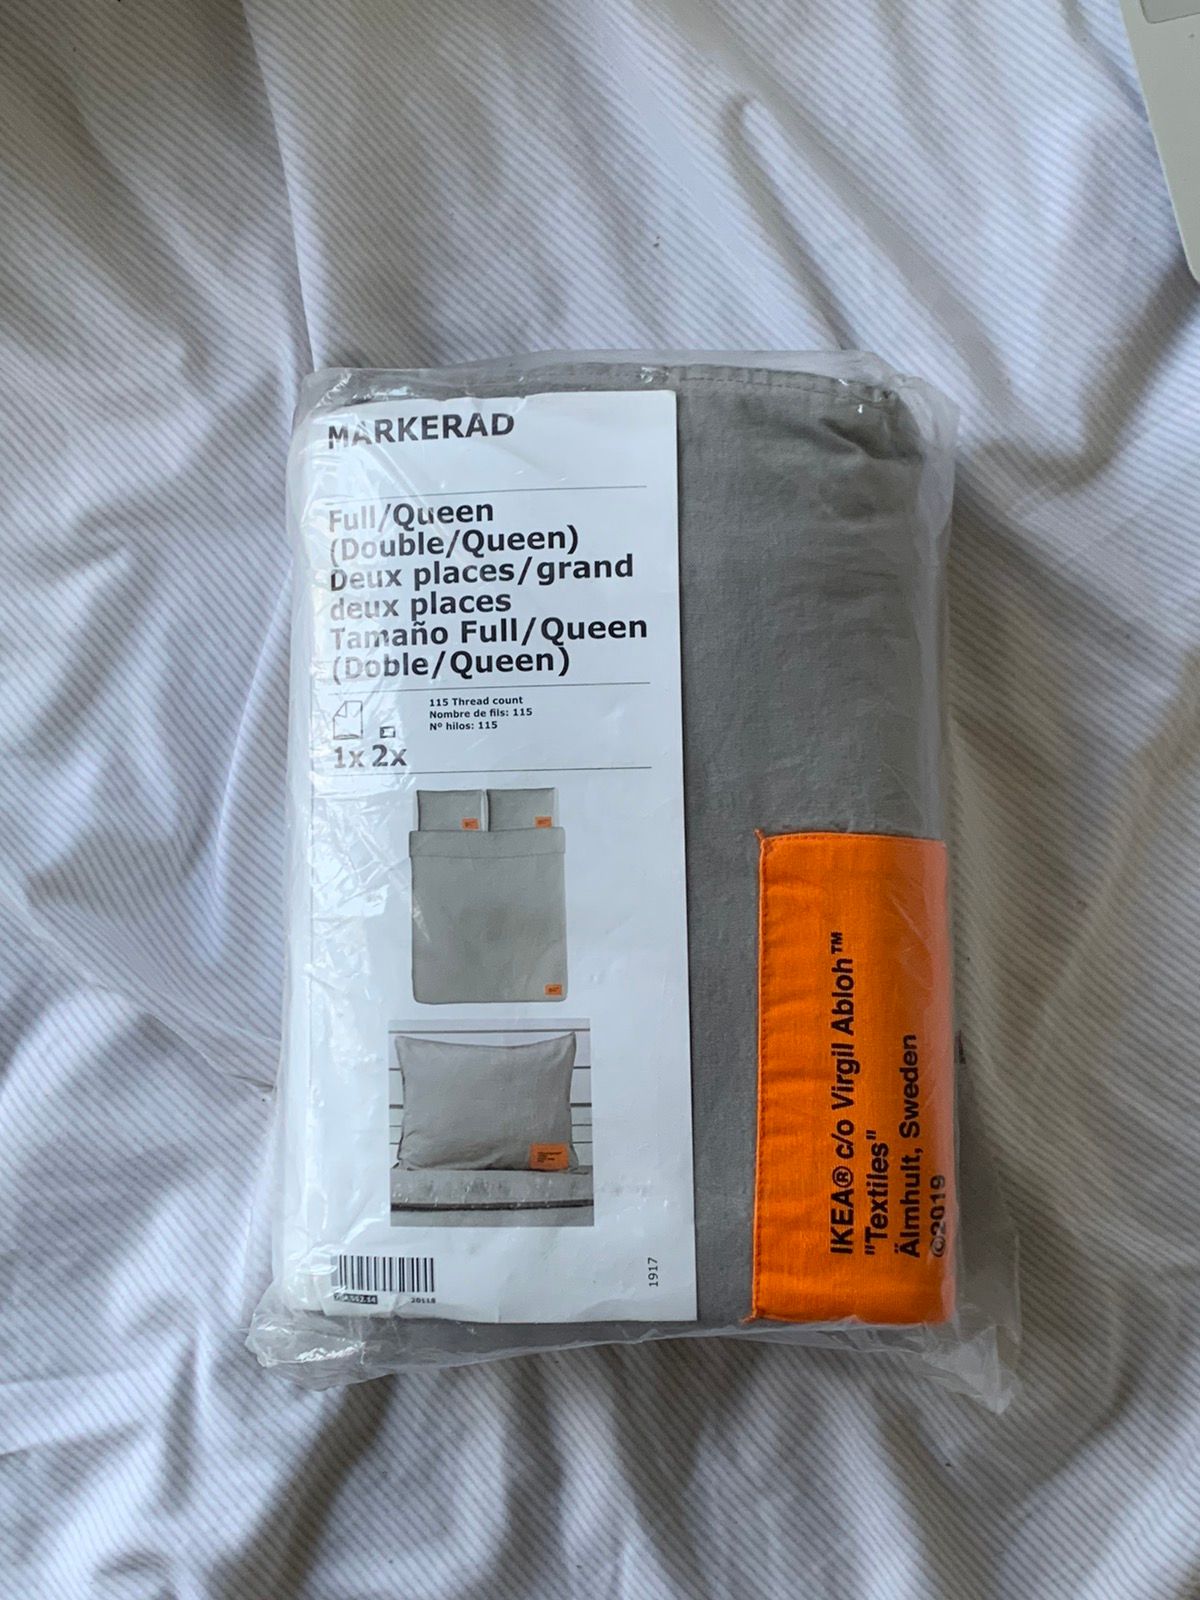 IKEA Virgil Abloh Markerad Full/Queen Bed Duvet Cover And 2 Pillow Cases